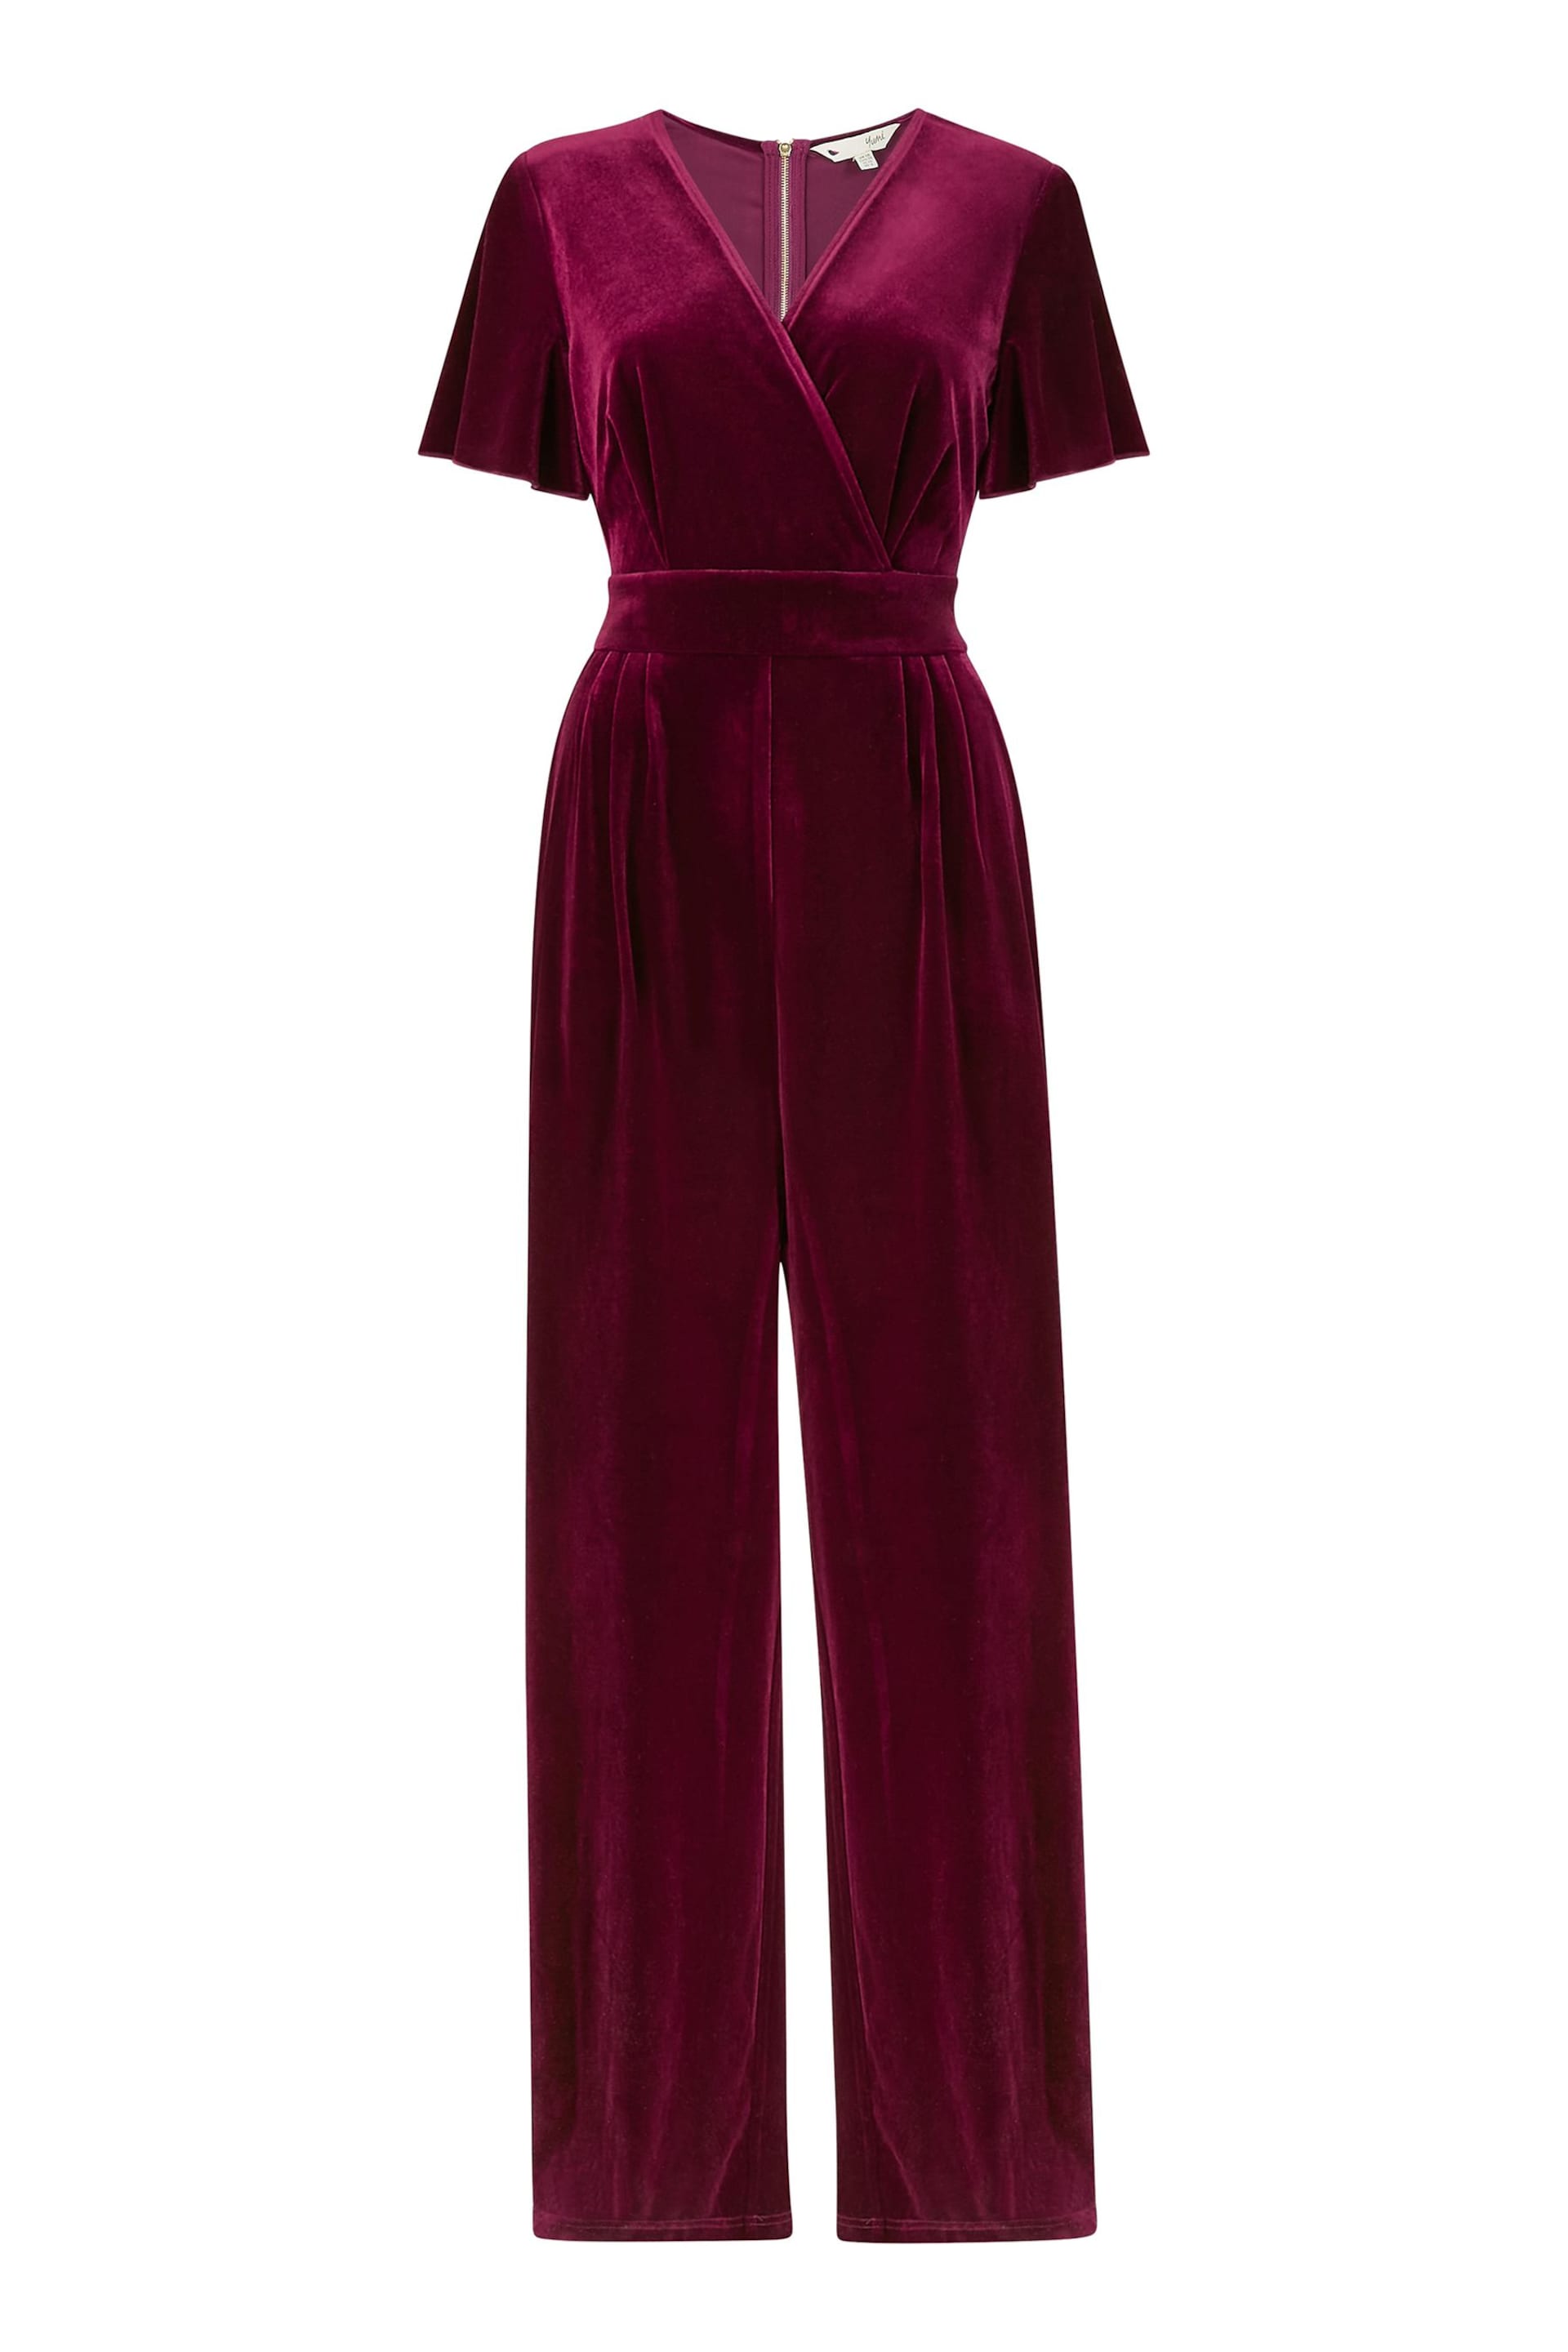 Yumi Purple Jumpsuit With Angel Sleeves - Image 4 of 4